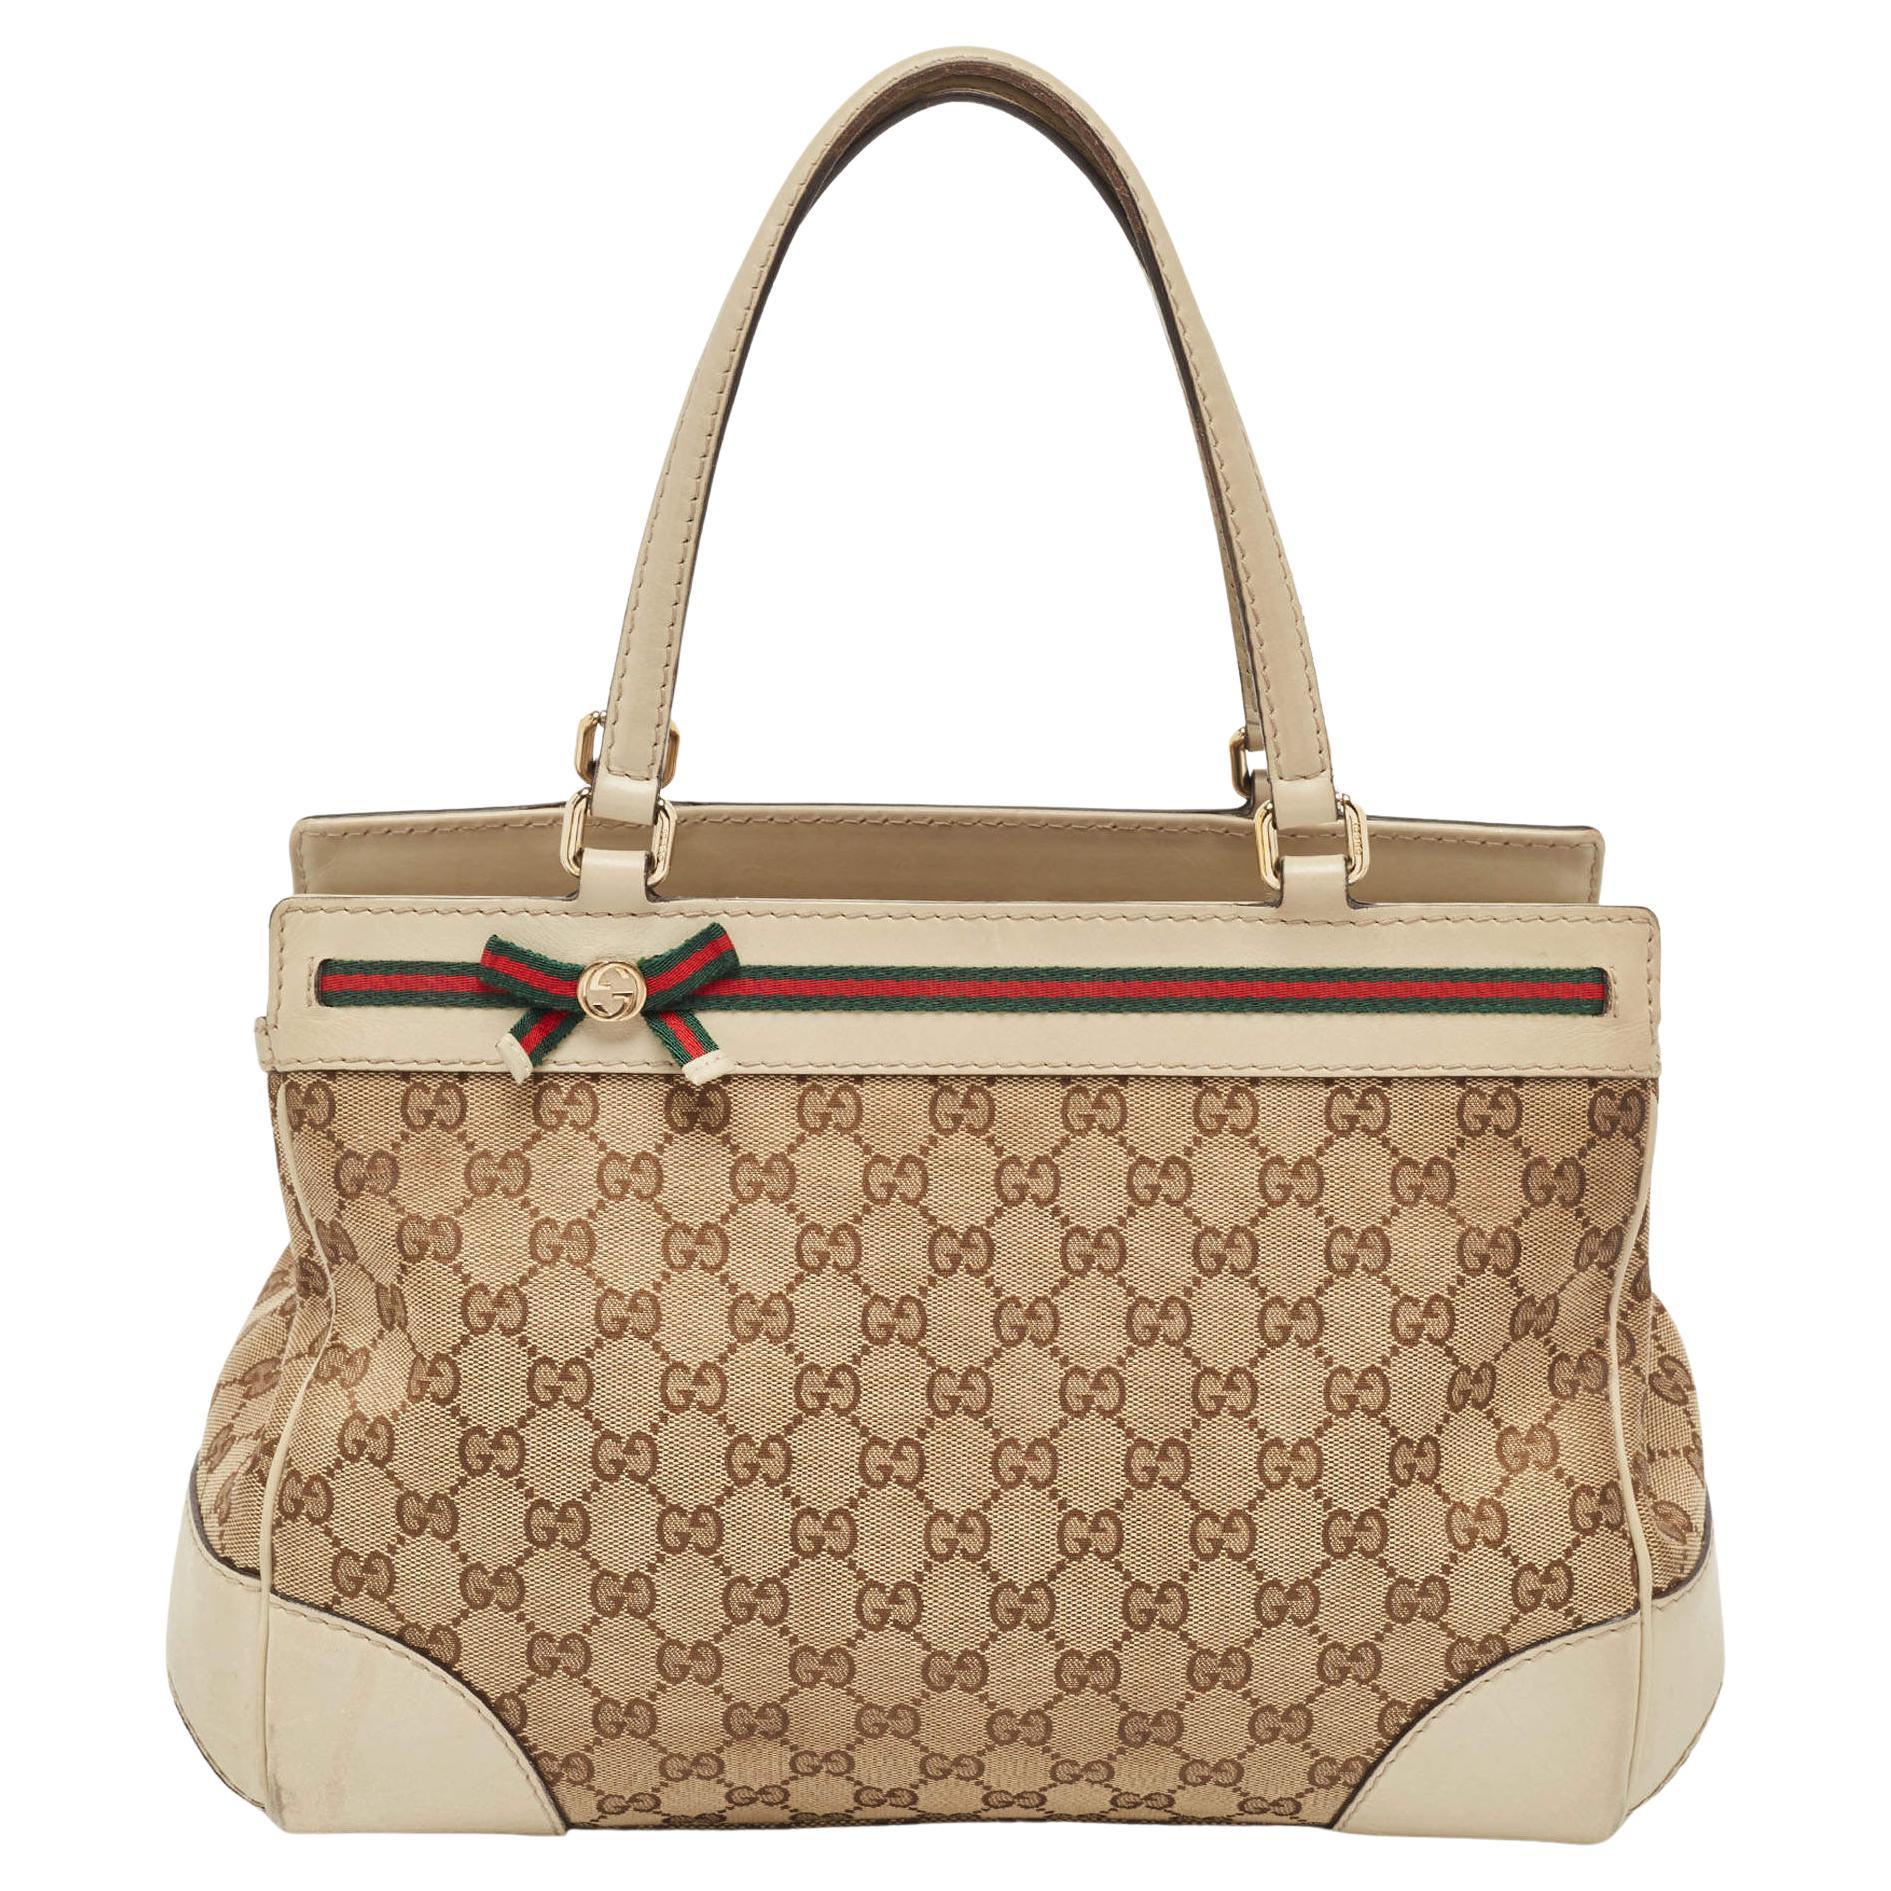 Gucci Beige/Cream GG Canvas and Leather Mayfair Tote